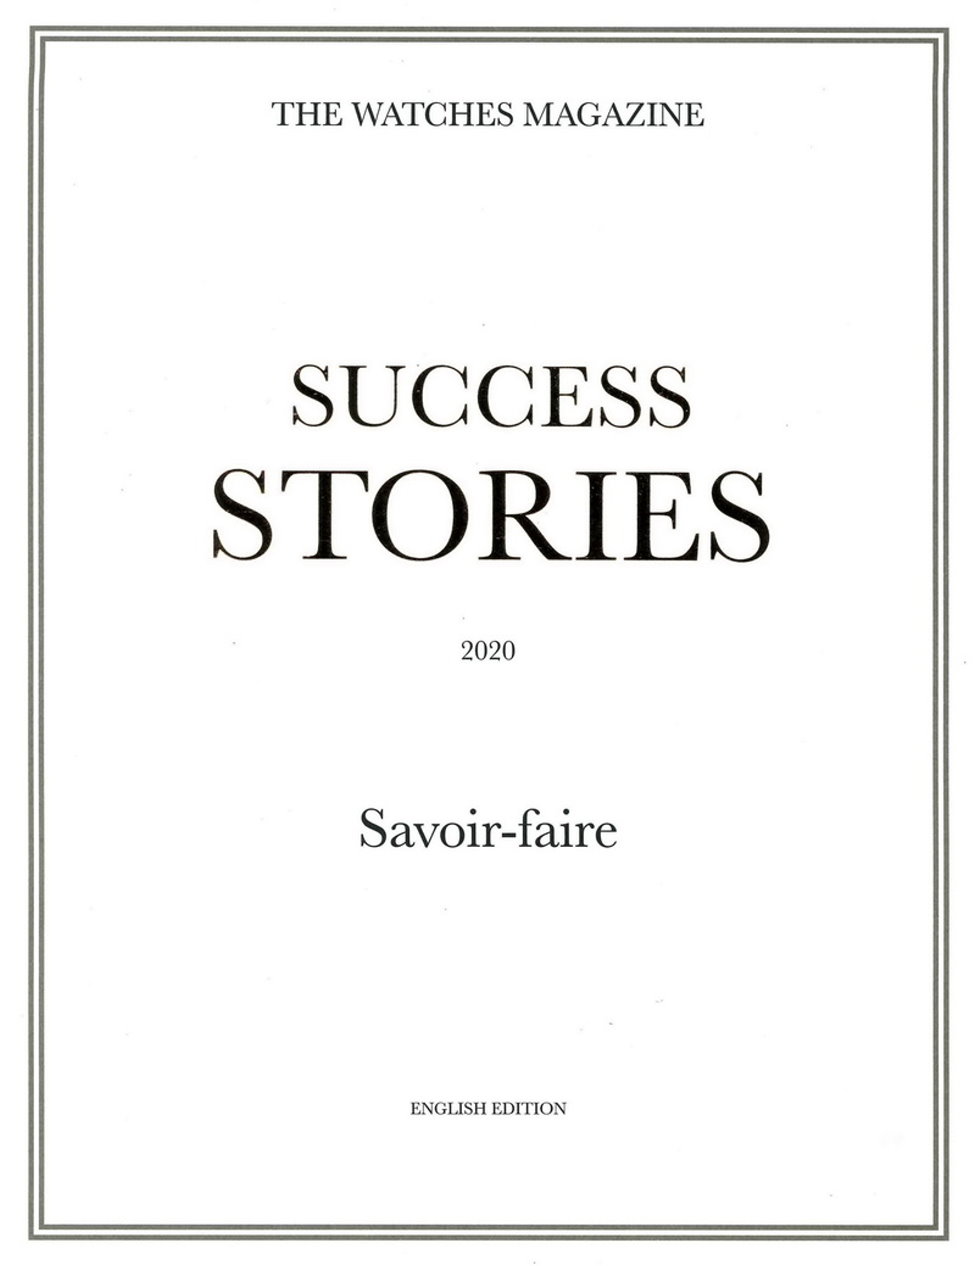 THE WATCHES MAGAZINE / SUCCESS STORIES 2020